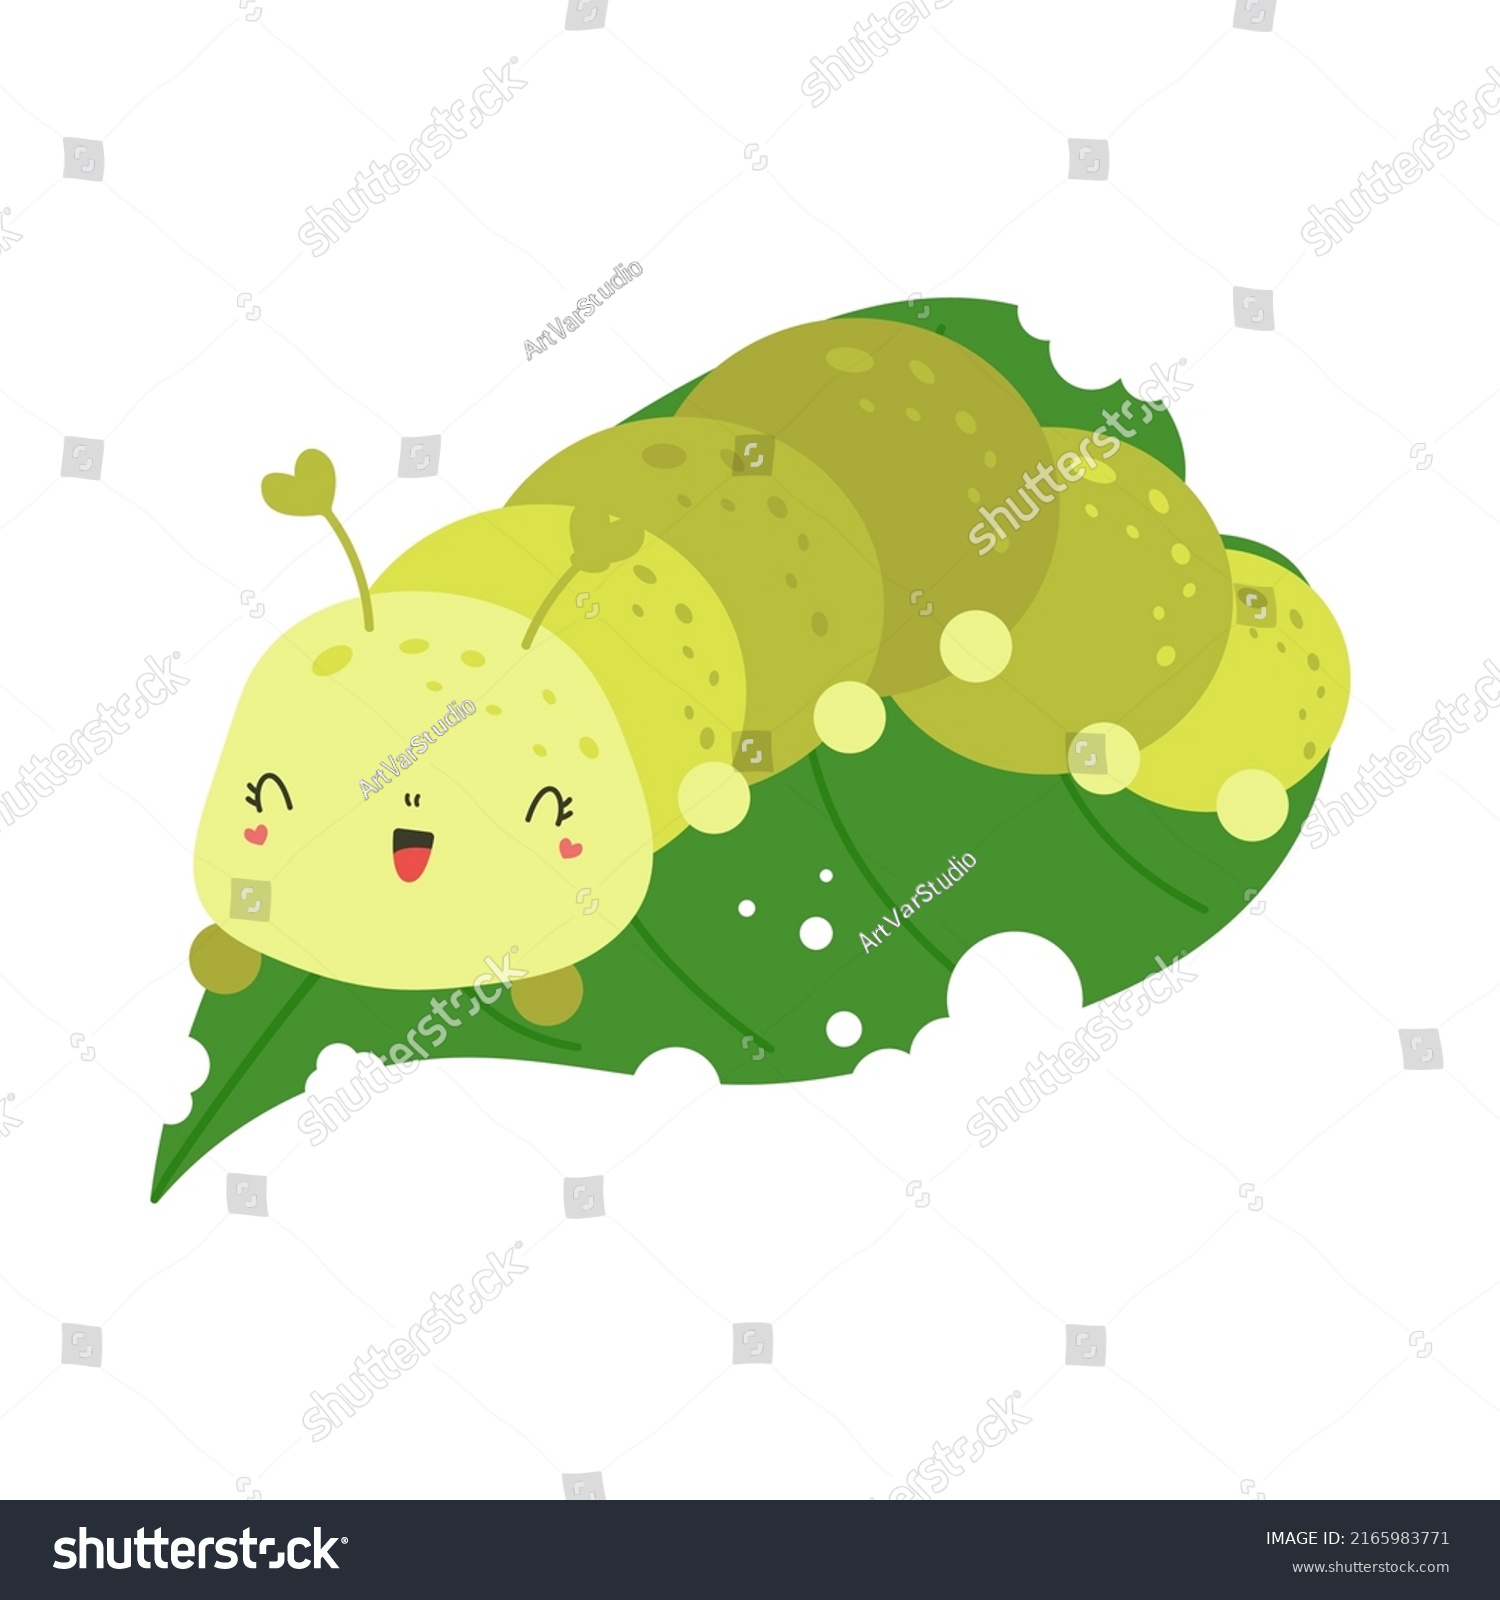 SVG of Caterpillar Clipart Character Besign. Baby Clip Art Caterpillar on a Leaf. Vector Illustration of an Animal for Coloring Pages, Prints for Clothes, Stickers, Baby Shower Invitation.  svg